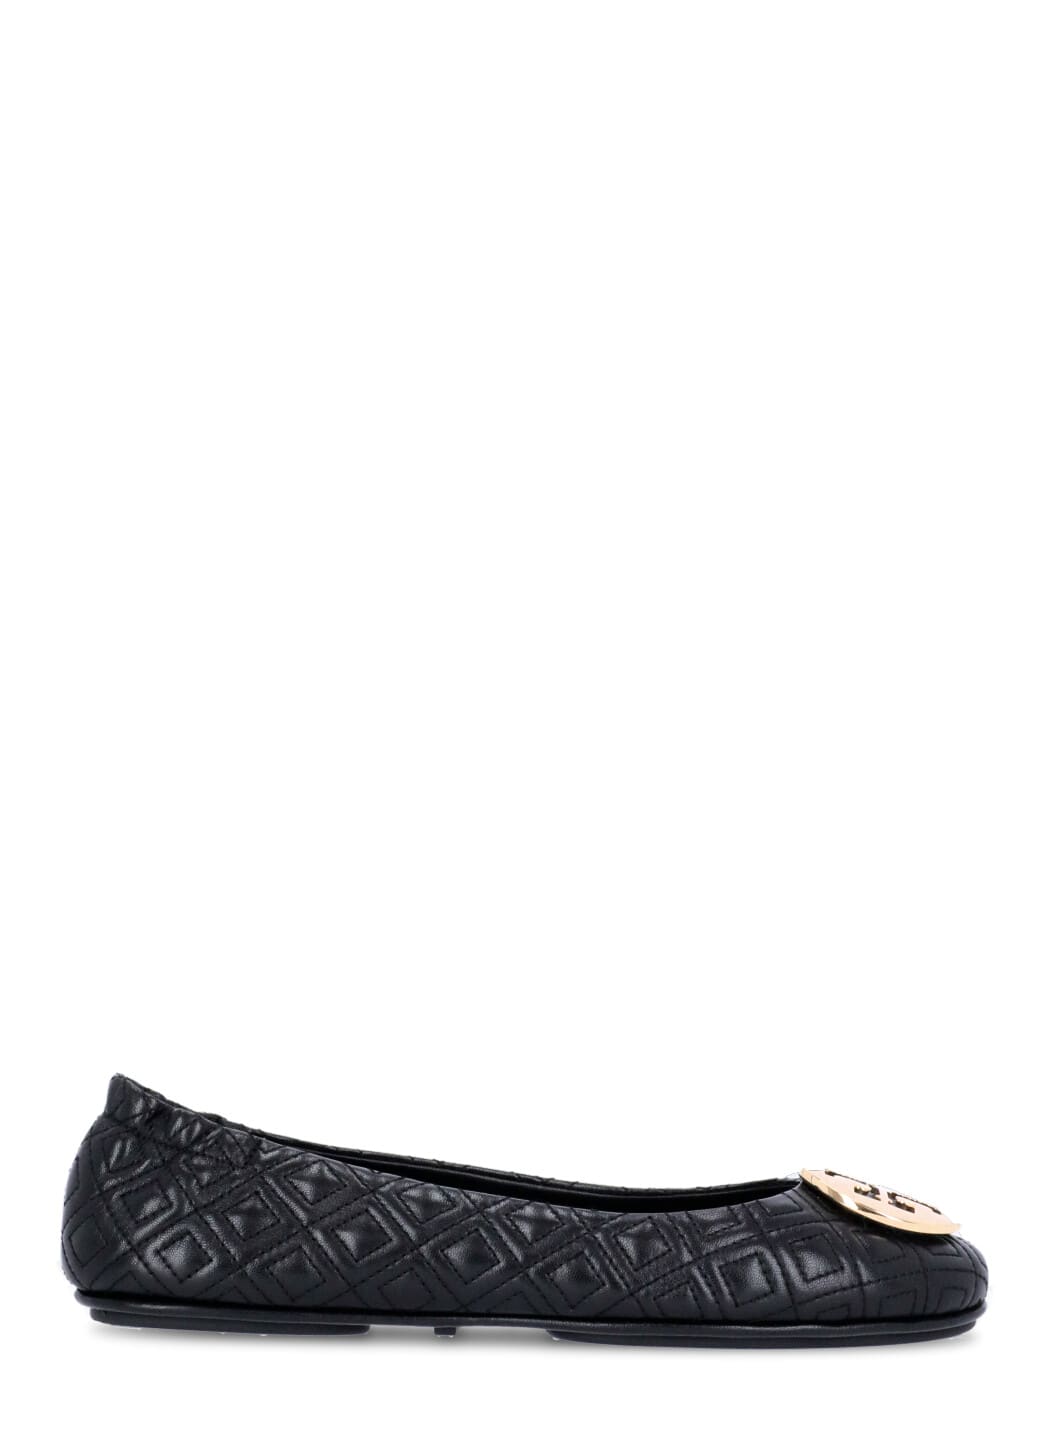 Buy Tory Burch Minnie Flat Shoes online, shop Tory Burch shoes with free shipping